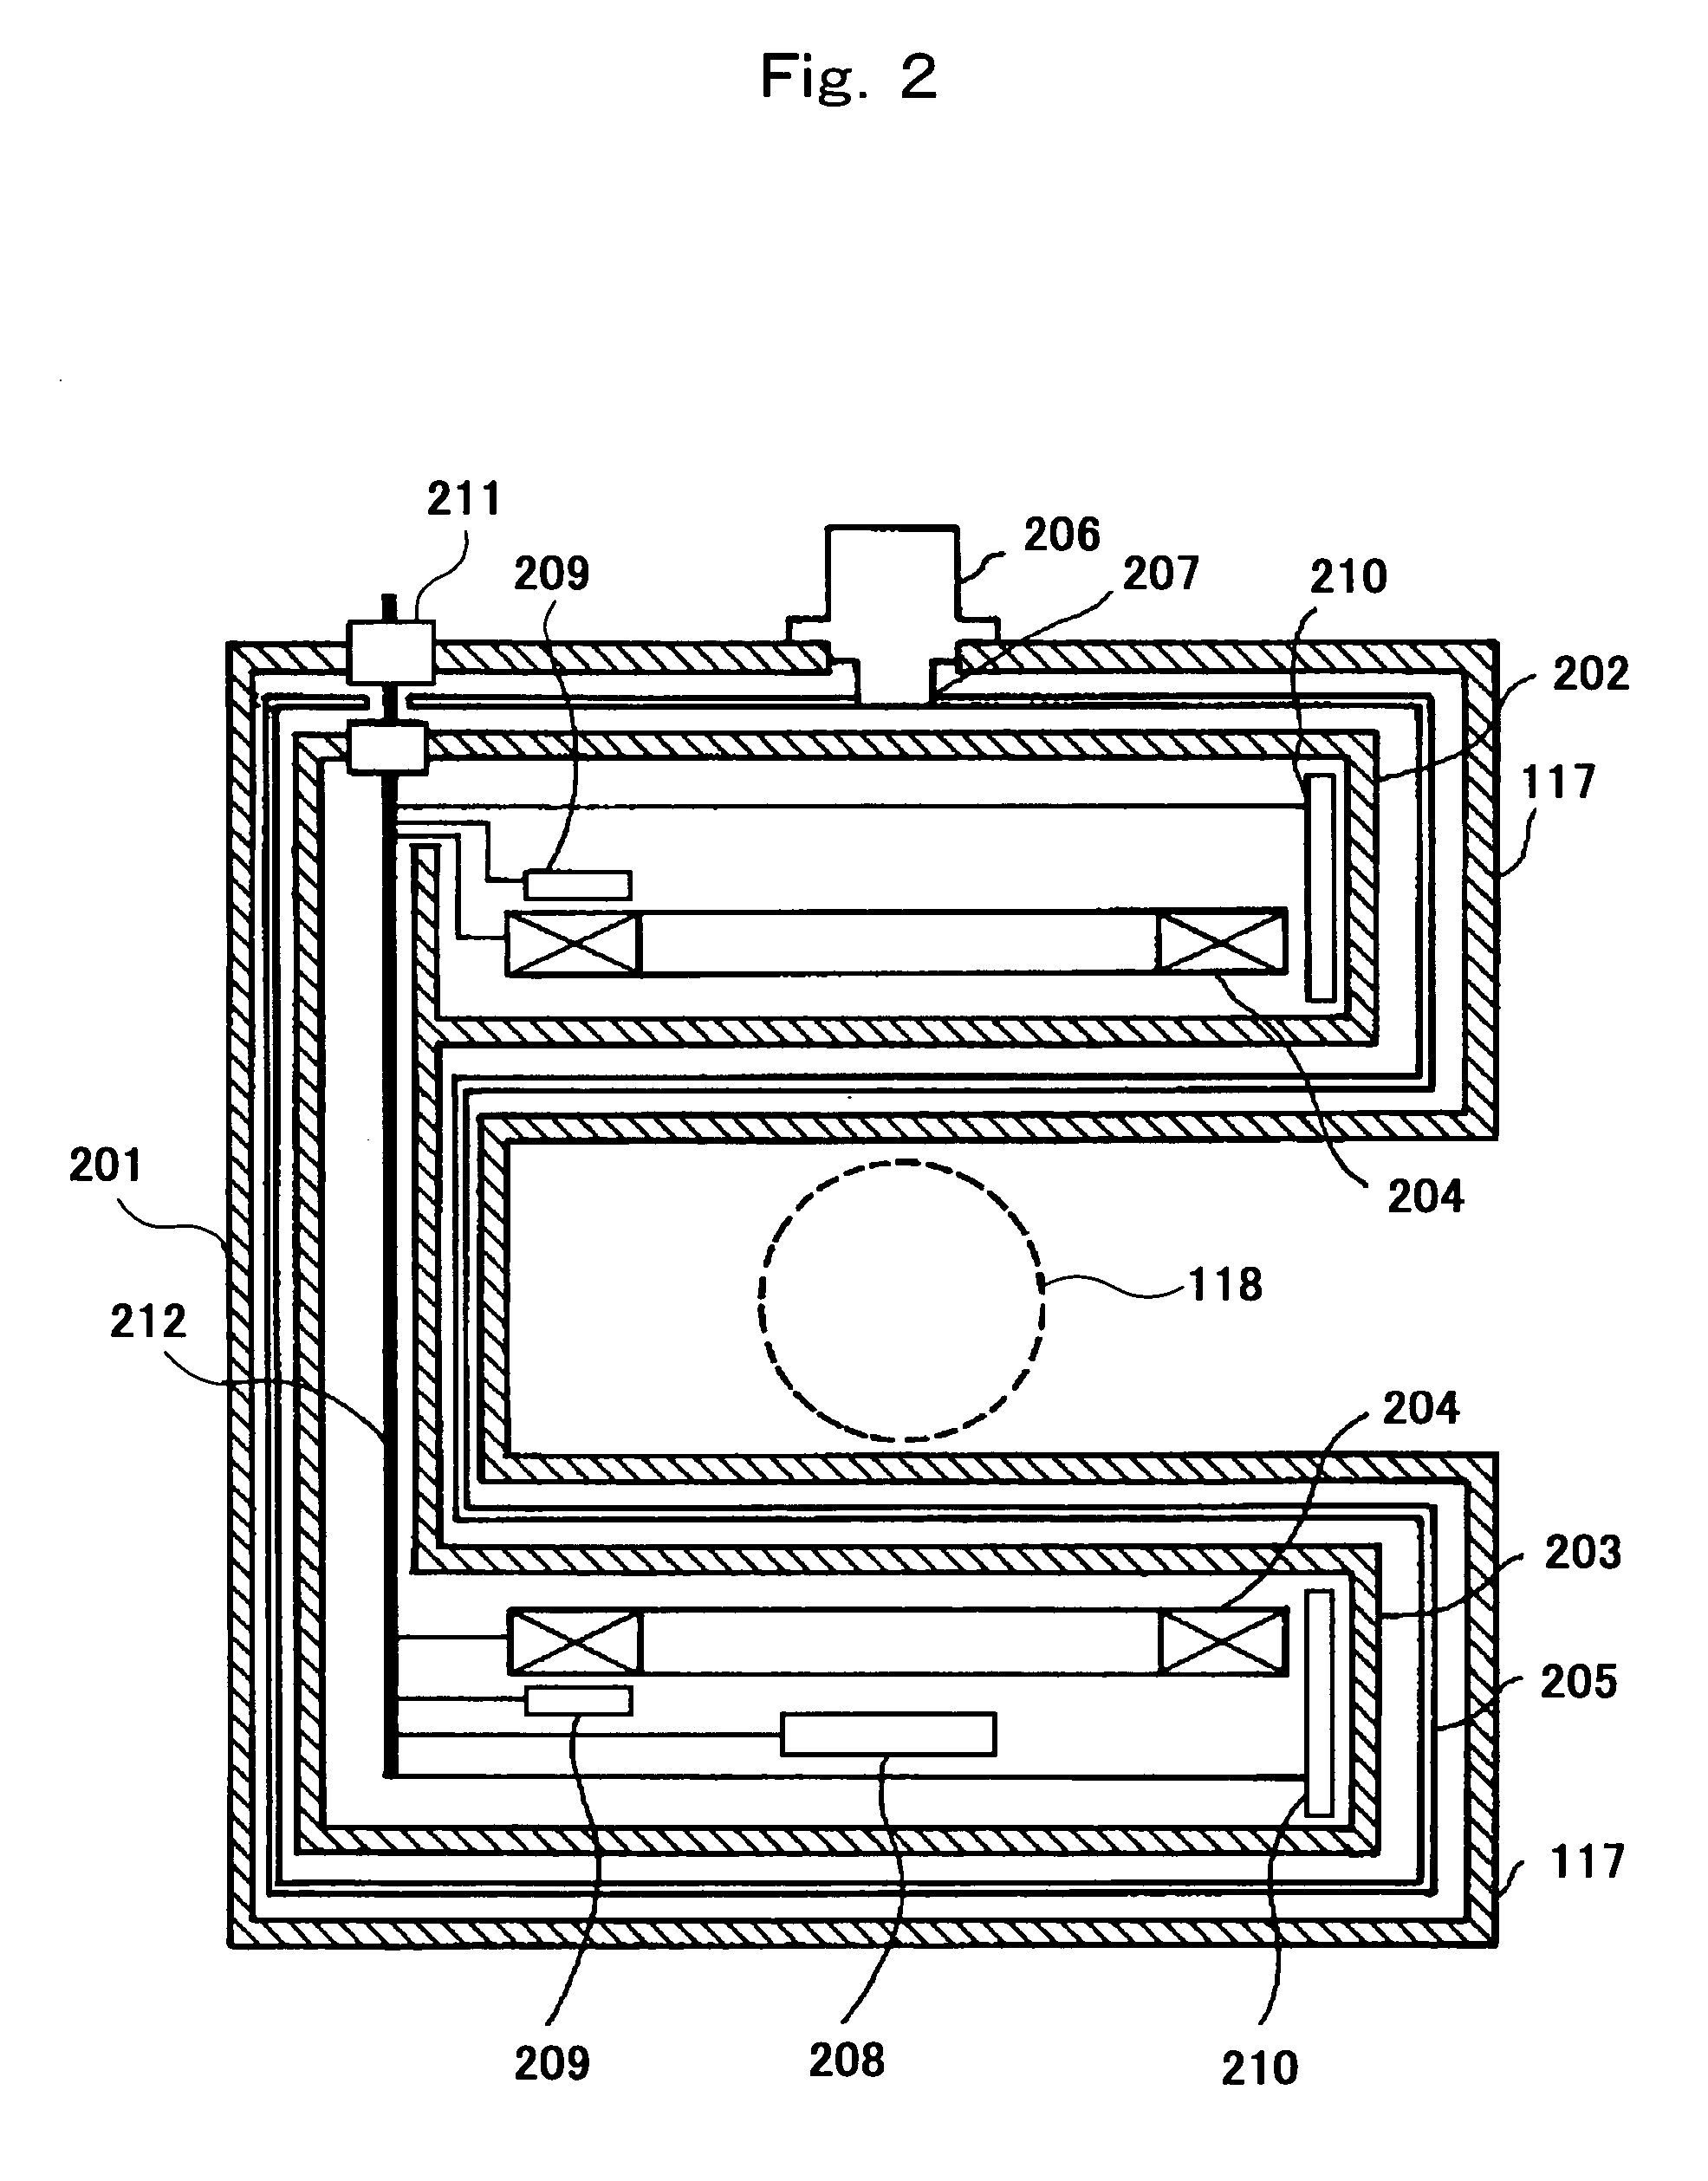 Magnetic resonance imaging apparatus provided with means for preventing closed loop circuit formation across and between inside and outside of cryostat